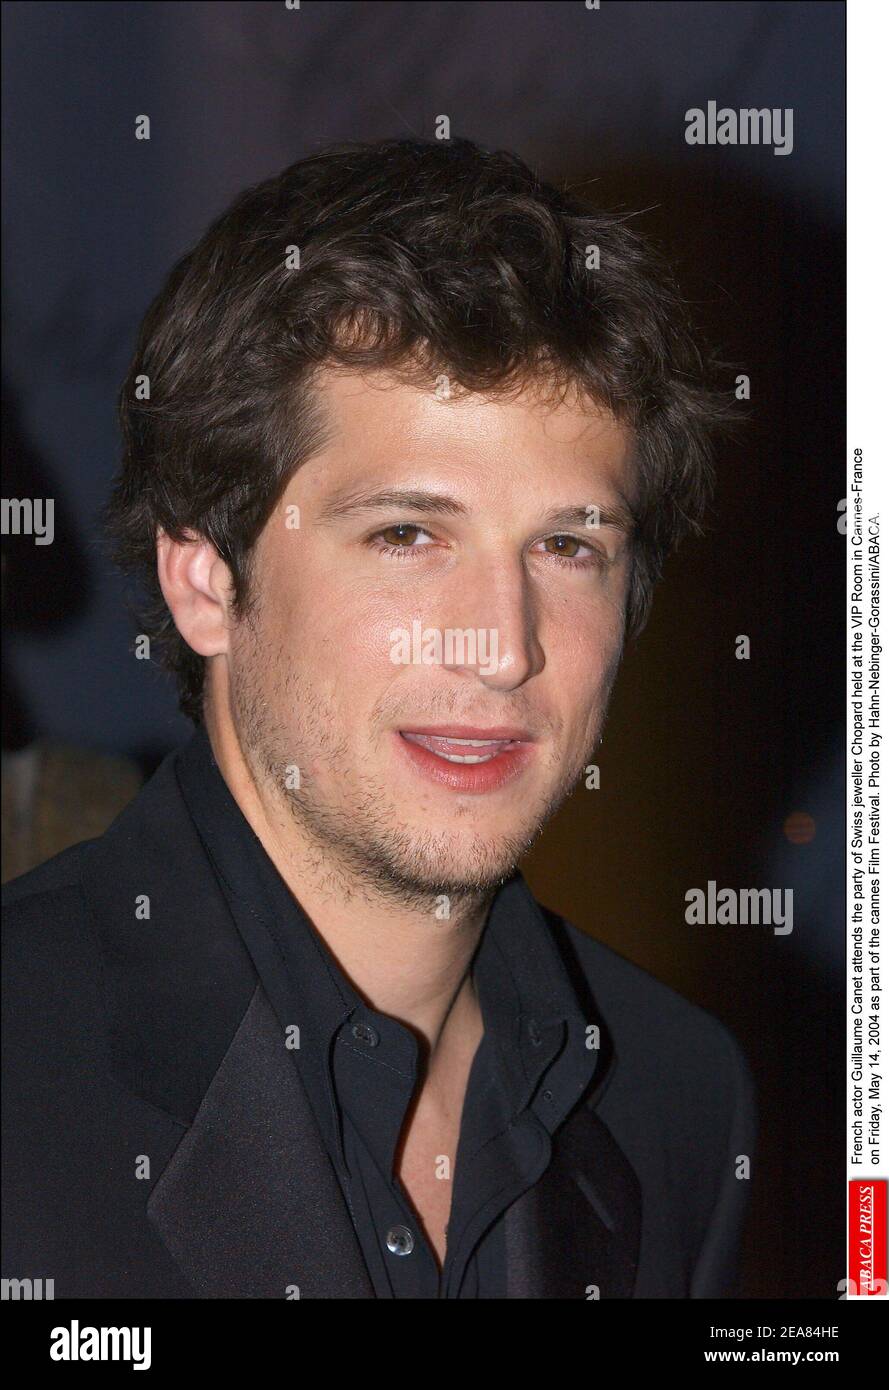 French actor Guillaume Canet attends the party of Swiss jeweller Chopard held at the VIP Room in Cannes-France on Friday, May 14, 2004 as part of the cannes Film Festival. Photo by Hahn-Nebinger-Gorassini/ABACA. Stock Photo